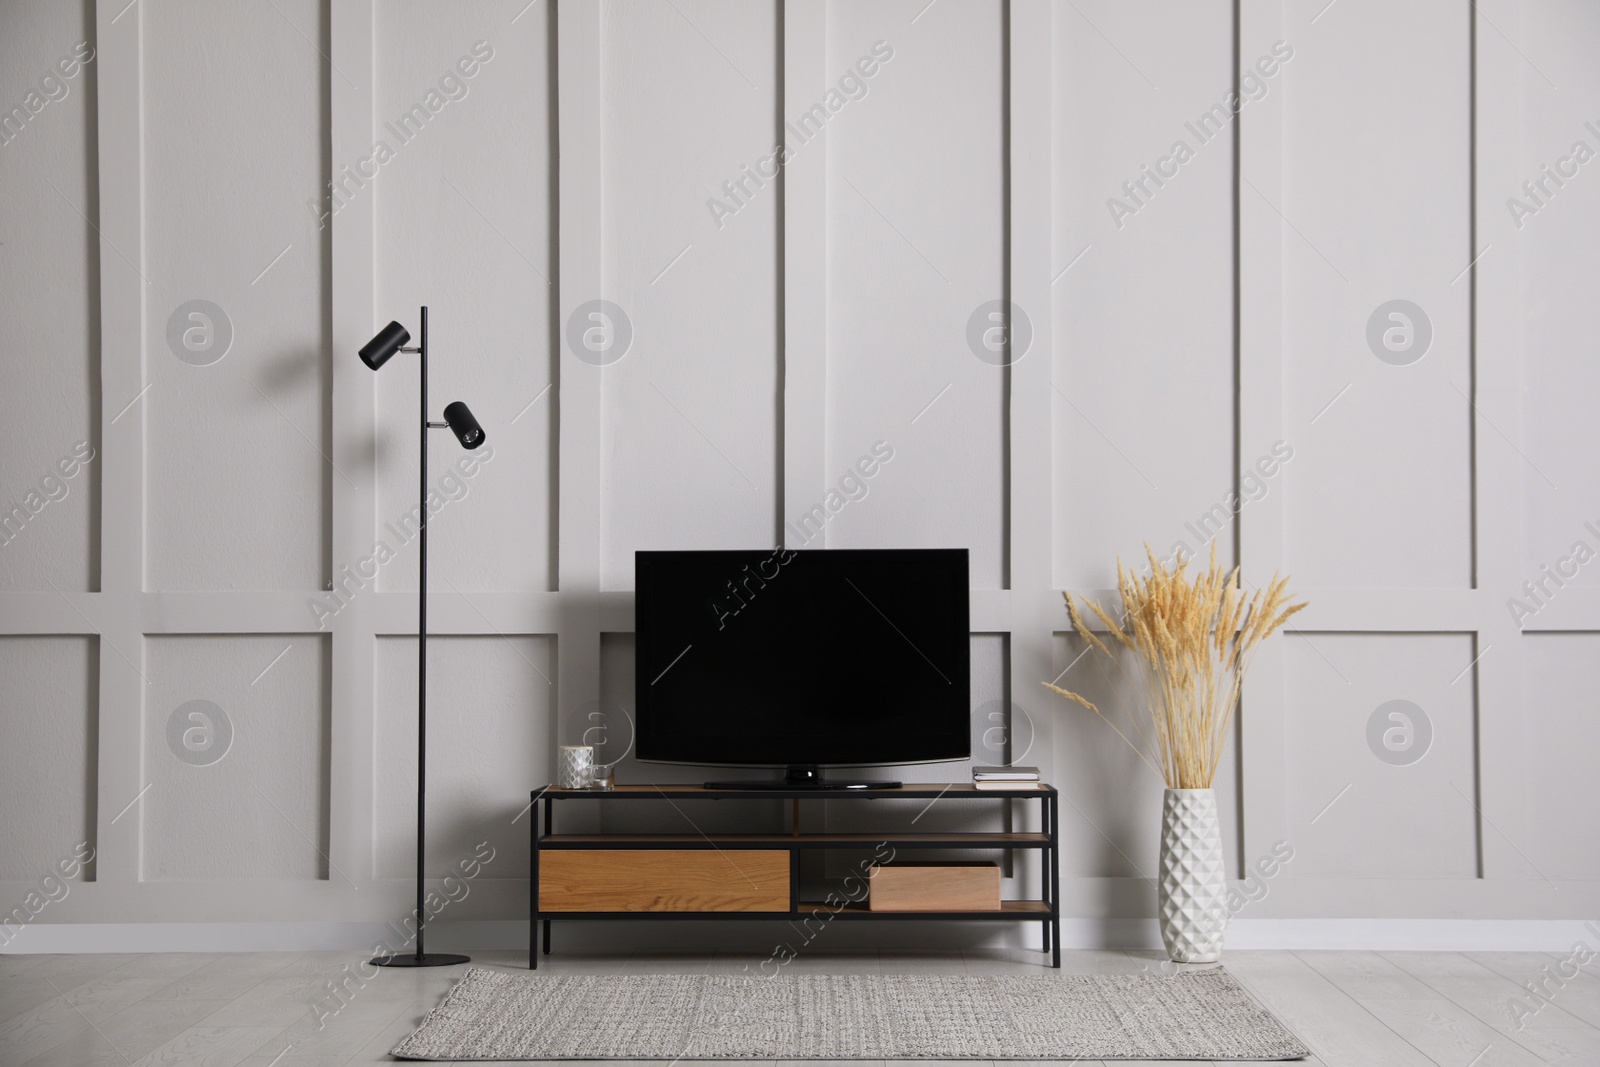 Photo of Elegant room interior with modern TV on stand, floor lamp and decorative dry plants